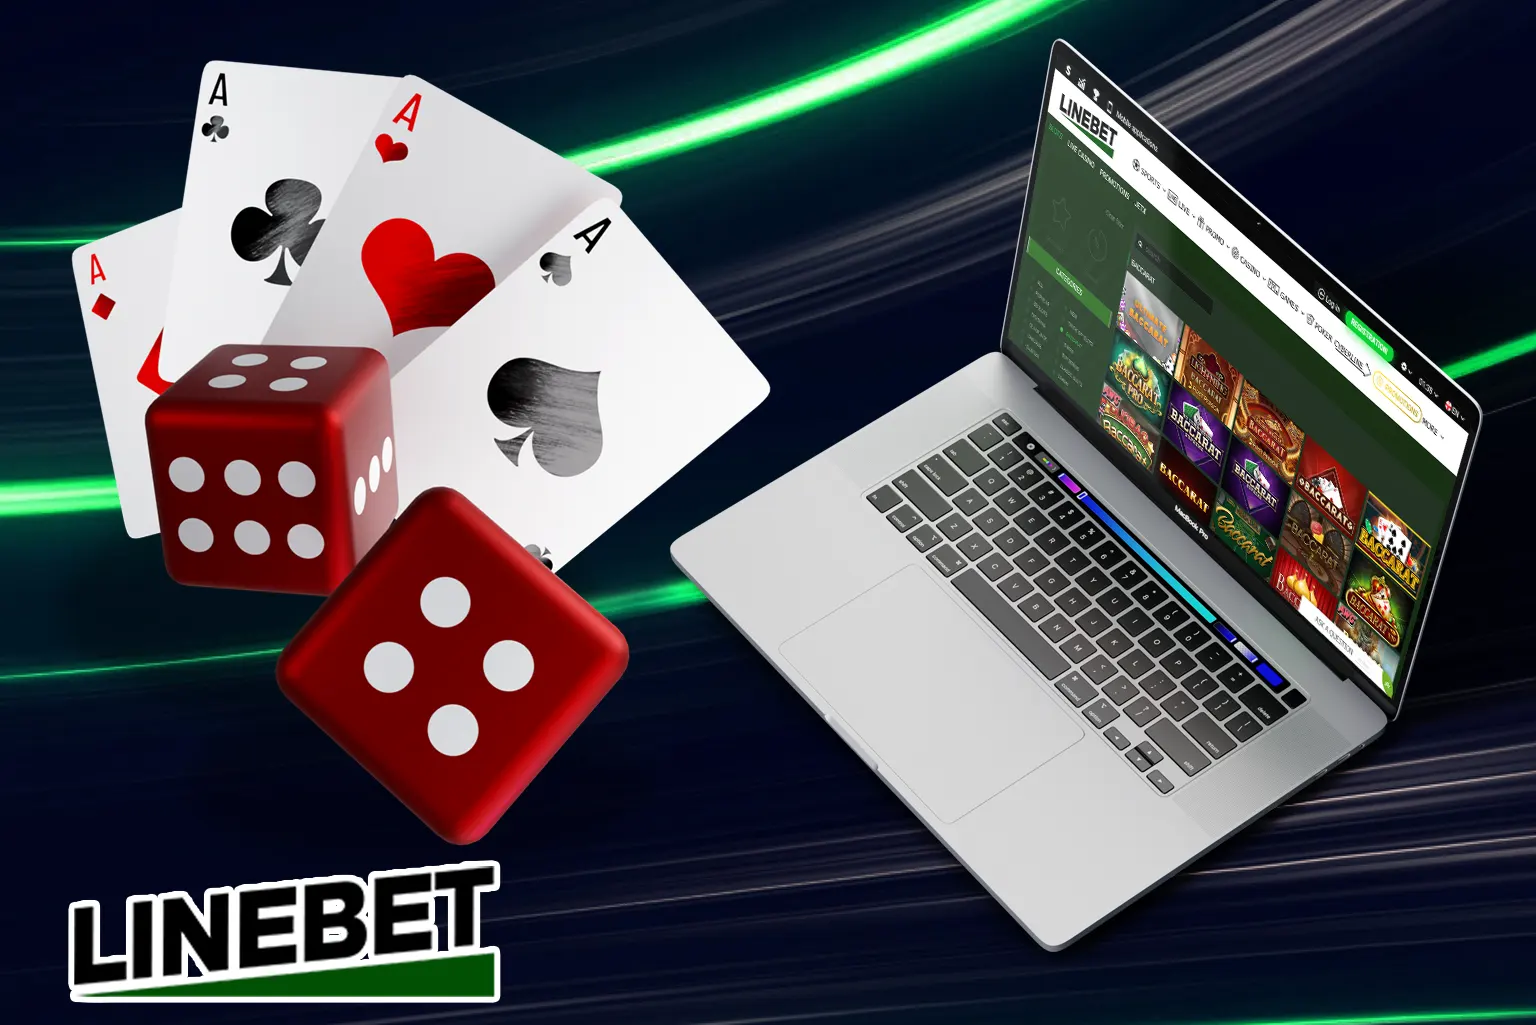 Play the famous card game at Linebet, with cards that have their value, dealers and draws waiting for you.